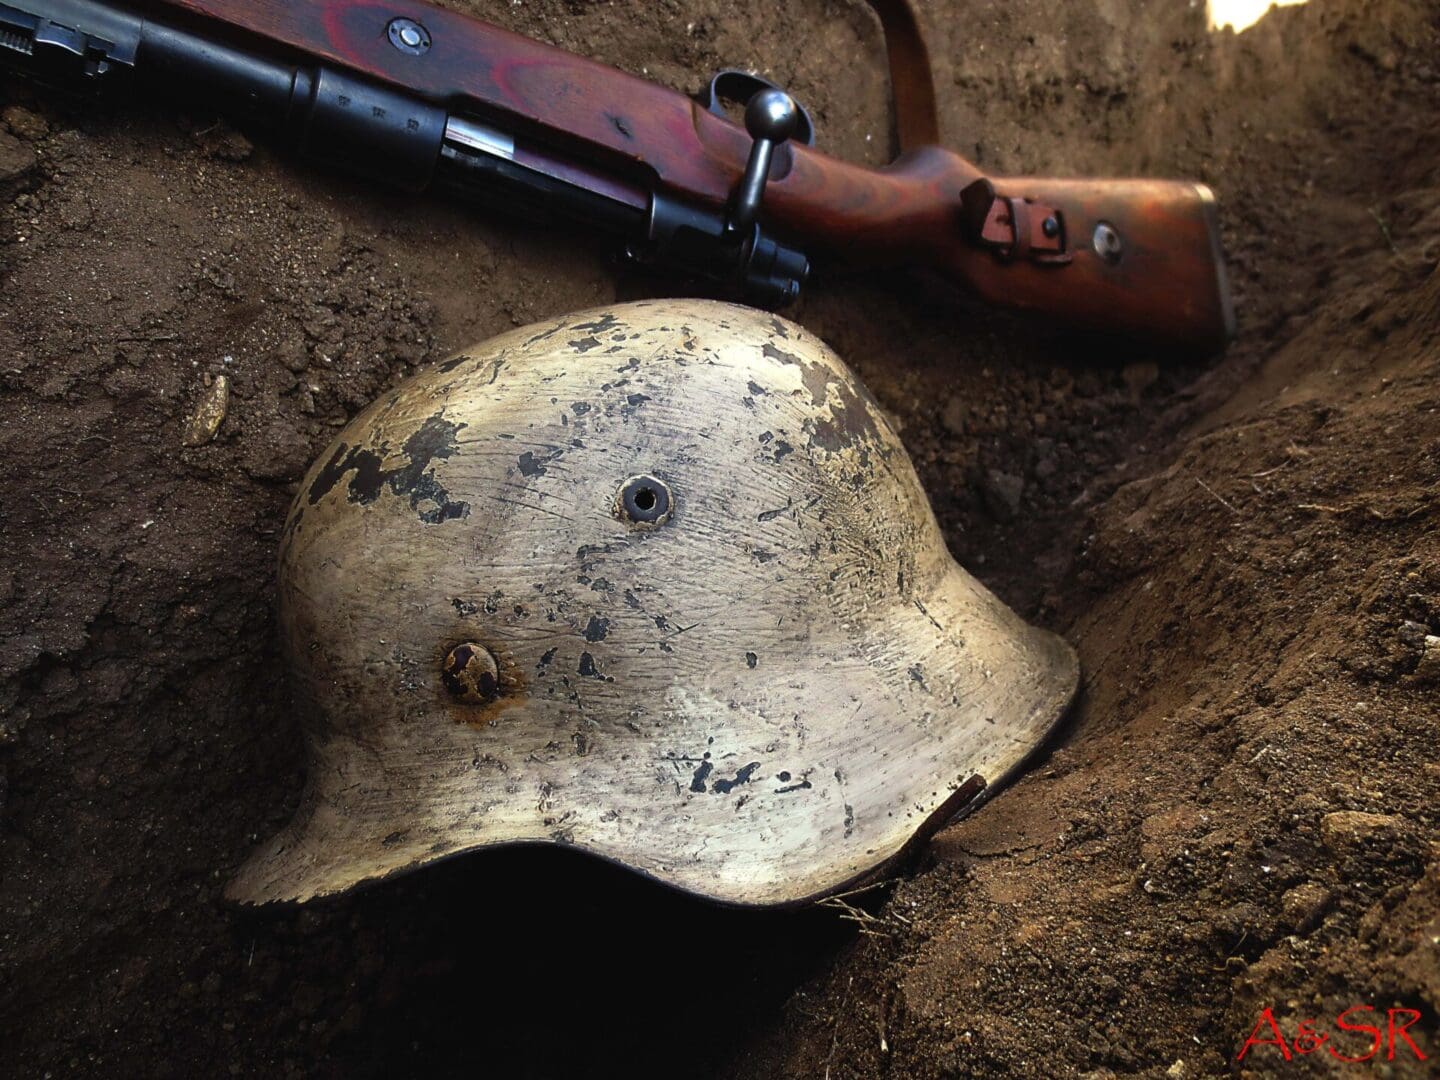 A helmet and rifle lying on the ground.